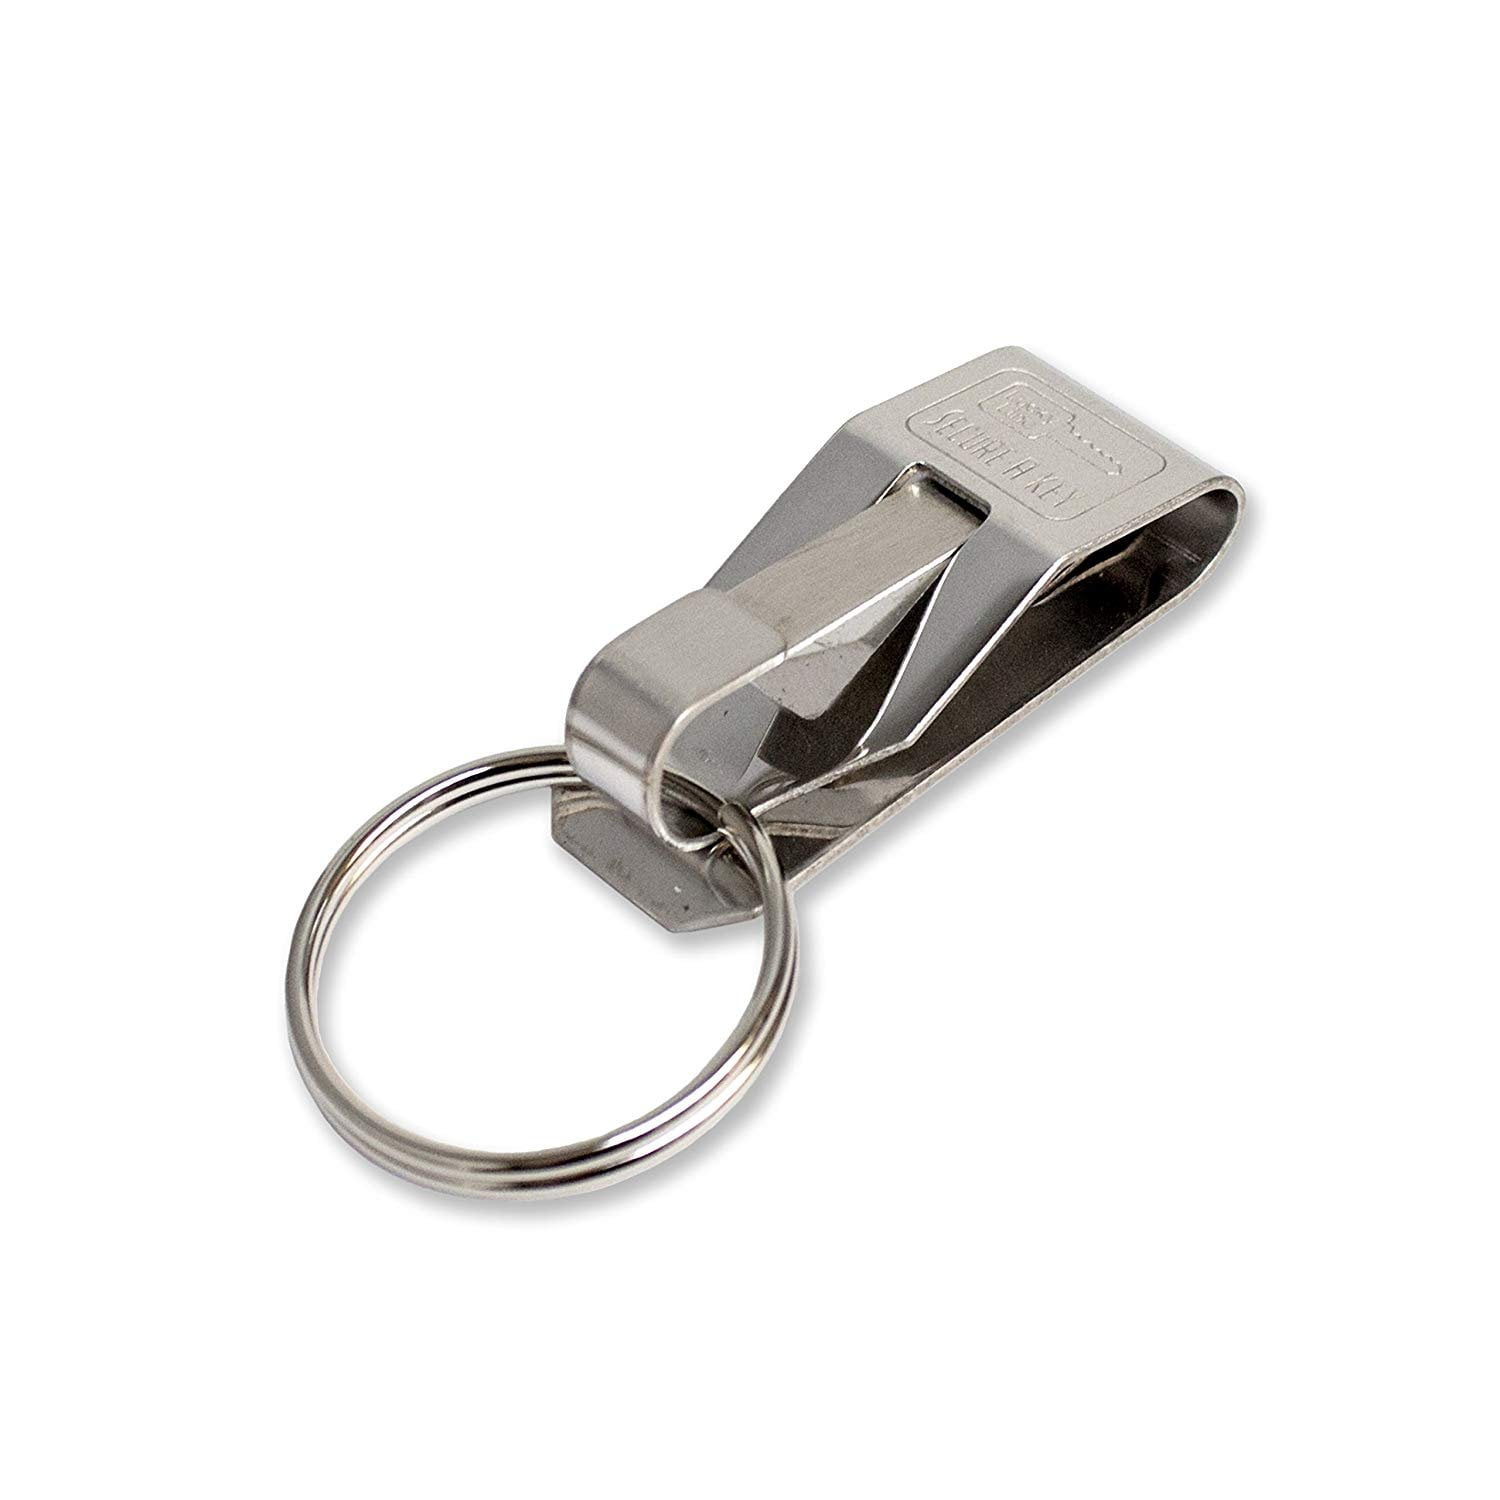 Tactical Duty Belt Key Clip Black Or Coyote Rothco 2750 